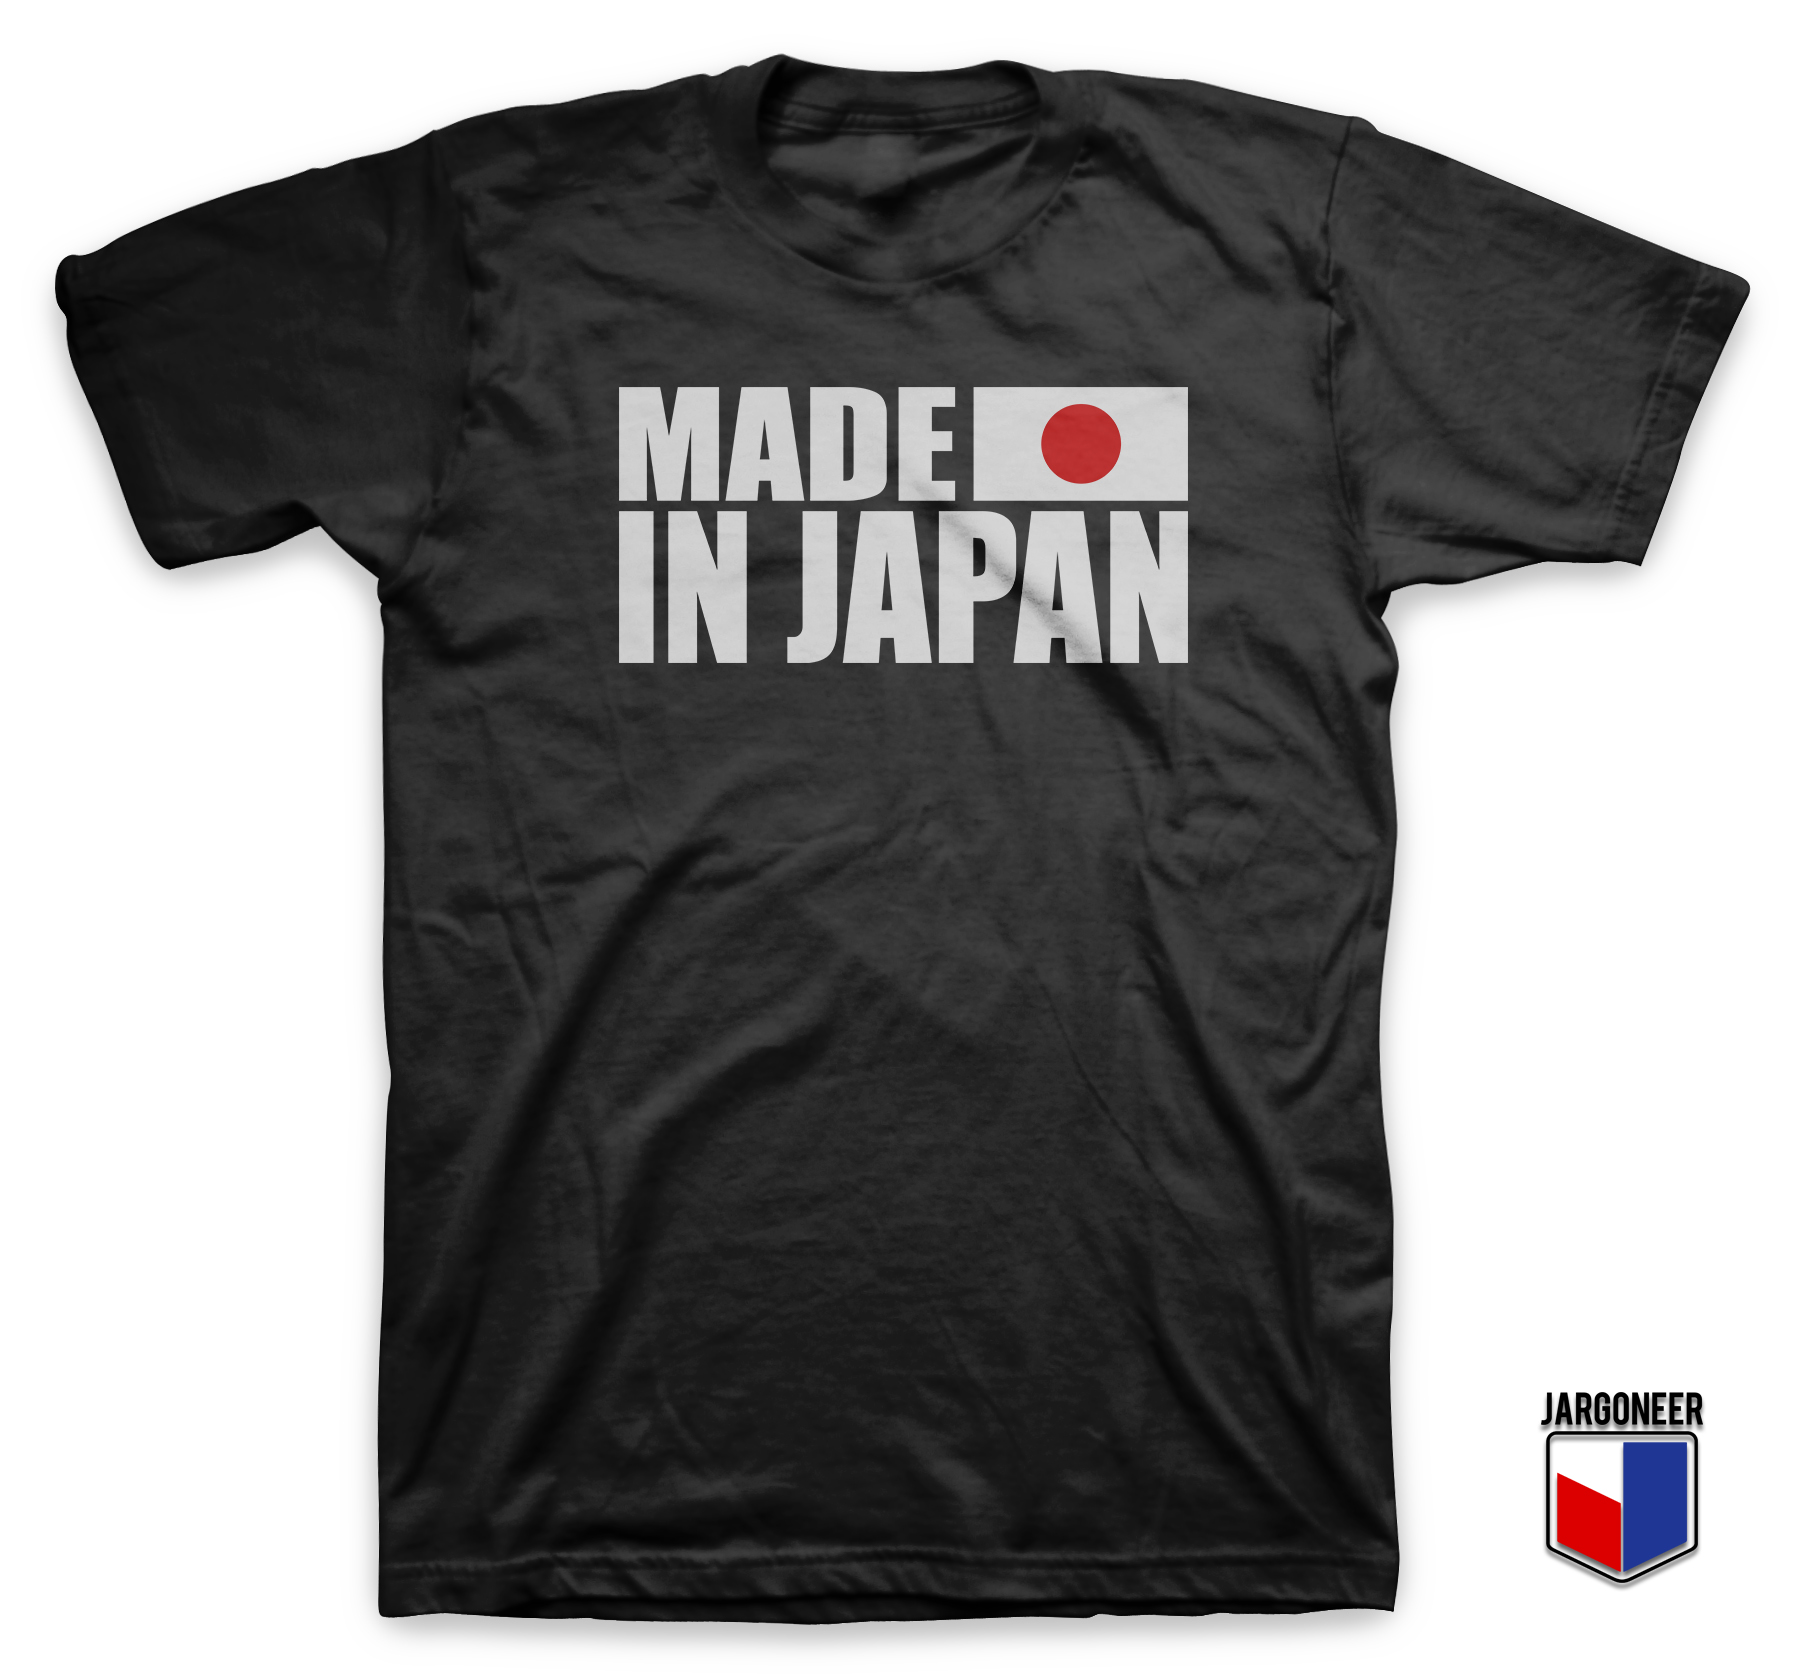 Made In Japan With Flag Black T Shirt - Shop Unique Graphic Cool Shirt Designs